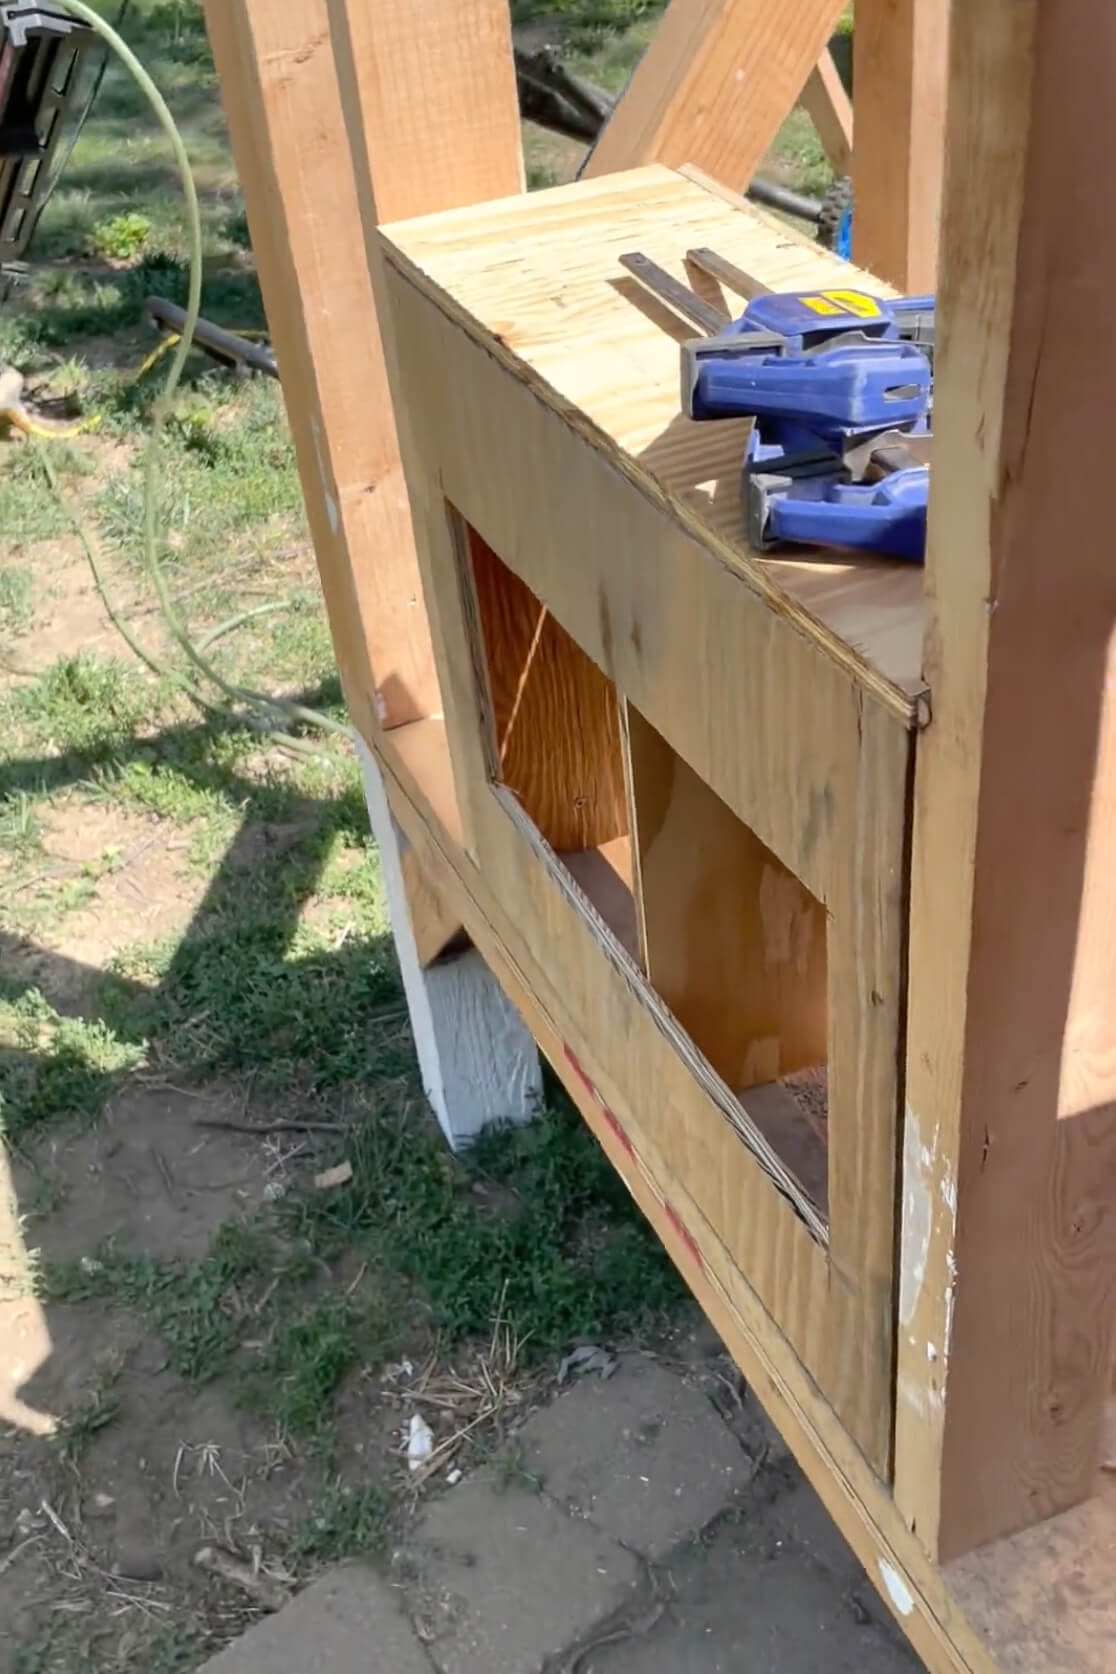 Building nesting boxes in our low cost, DIY chicken coop.